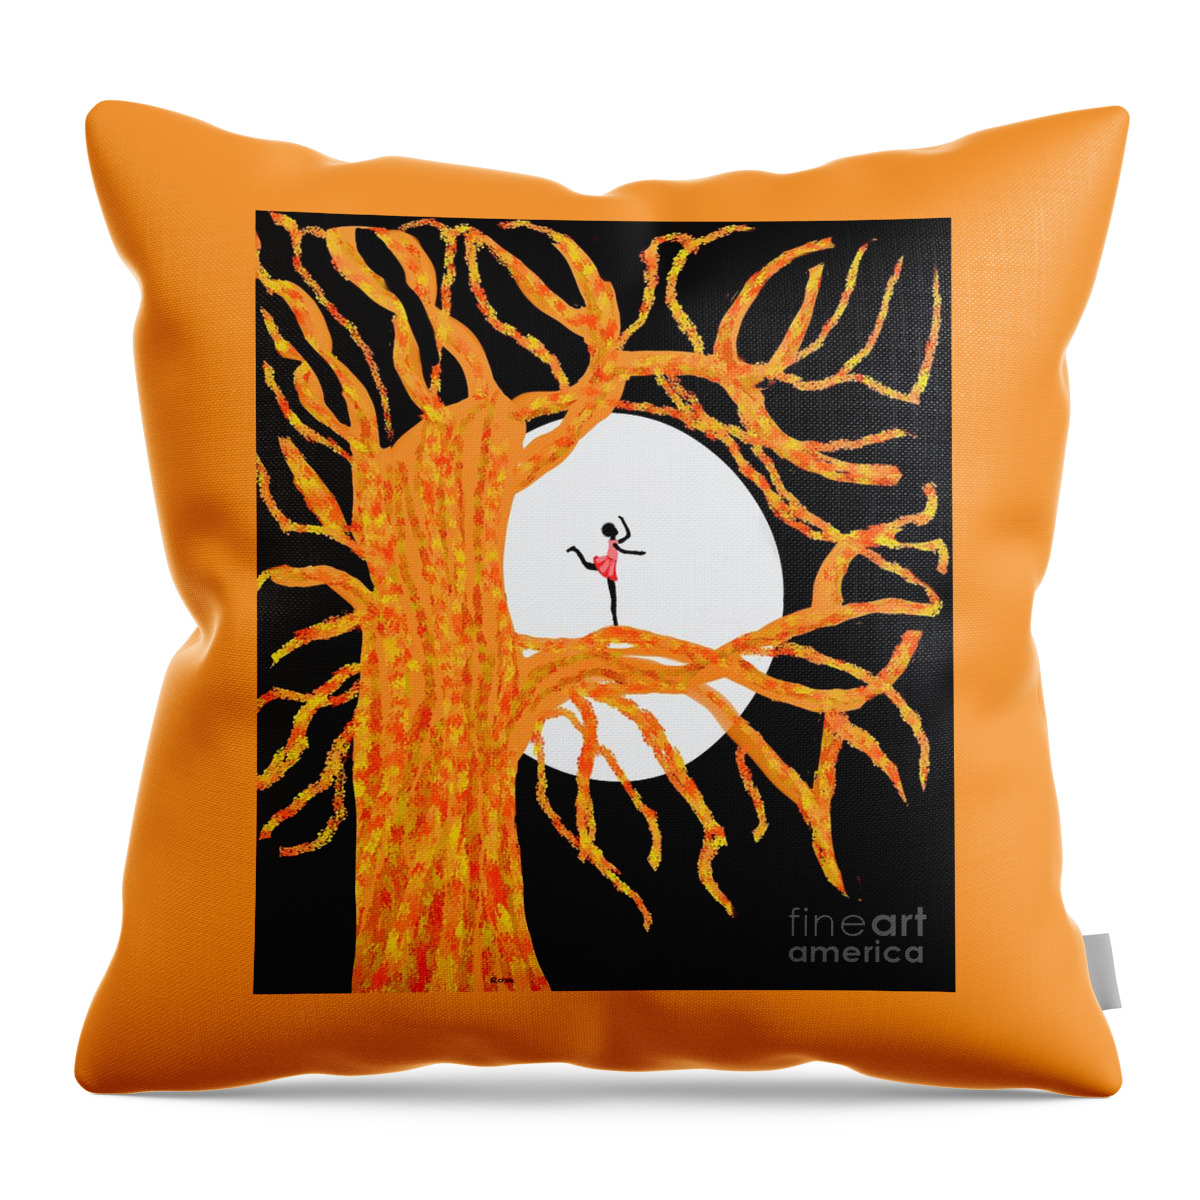 Old Twisted Tree Throw Pillow featuring the digital art The tree dancer by Elaine Hayward